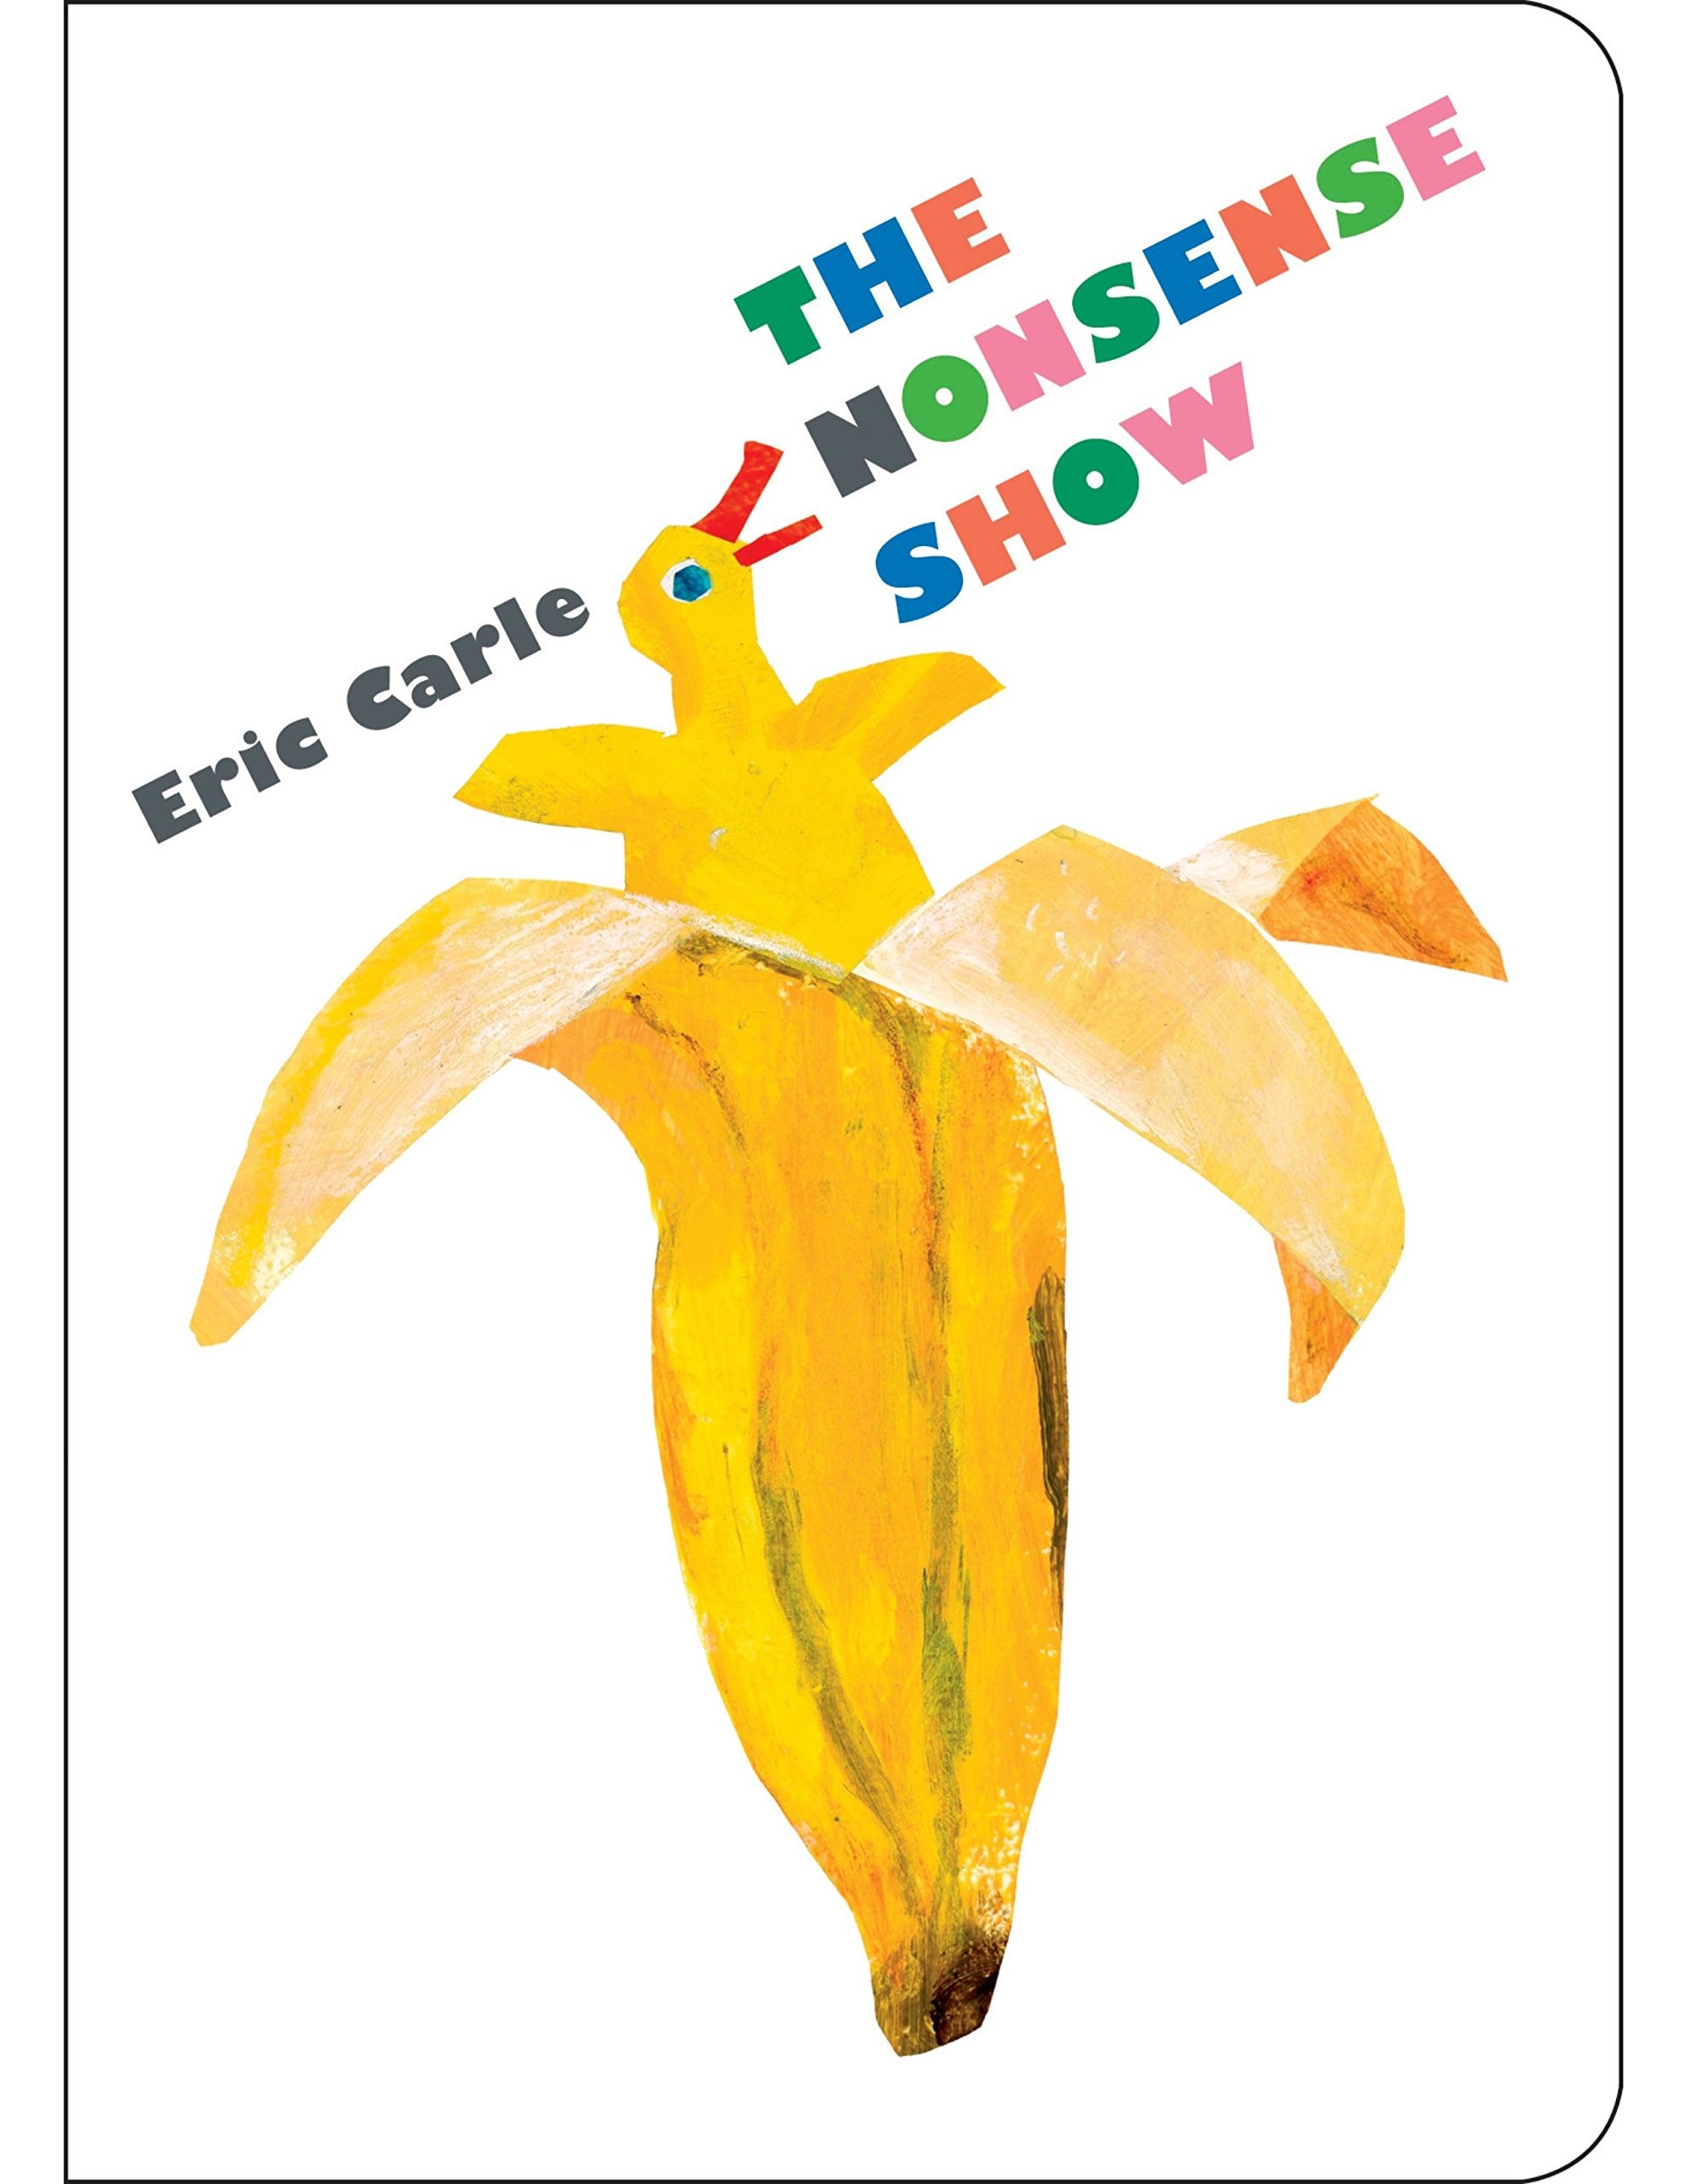 The Nonsense Show by Eric Carle Children's Book $2.19 + Free Prime Shipping or $25+ orders $2.15